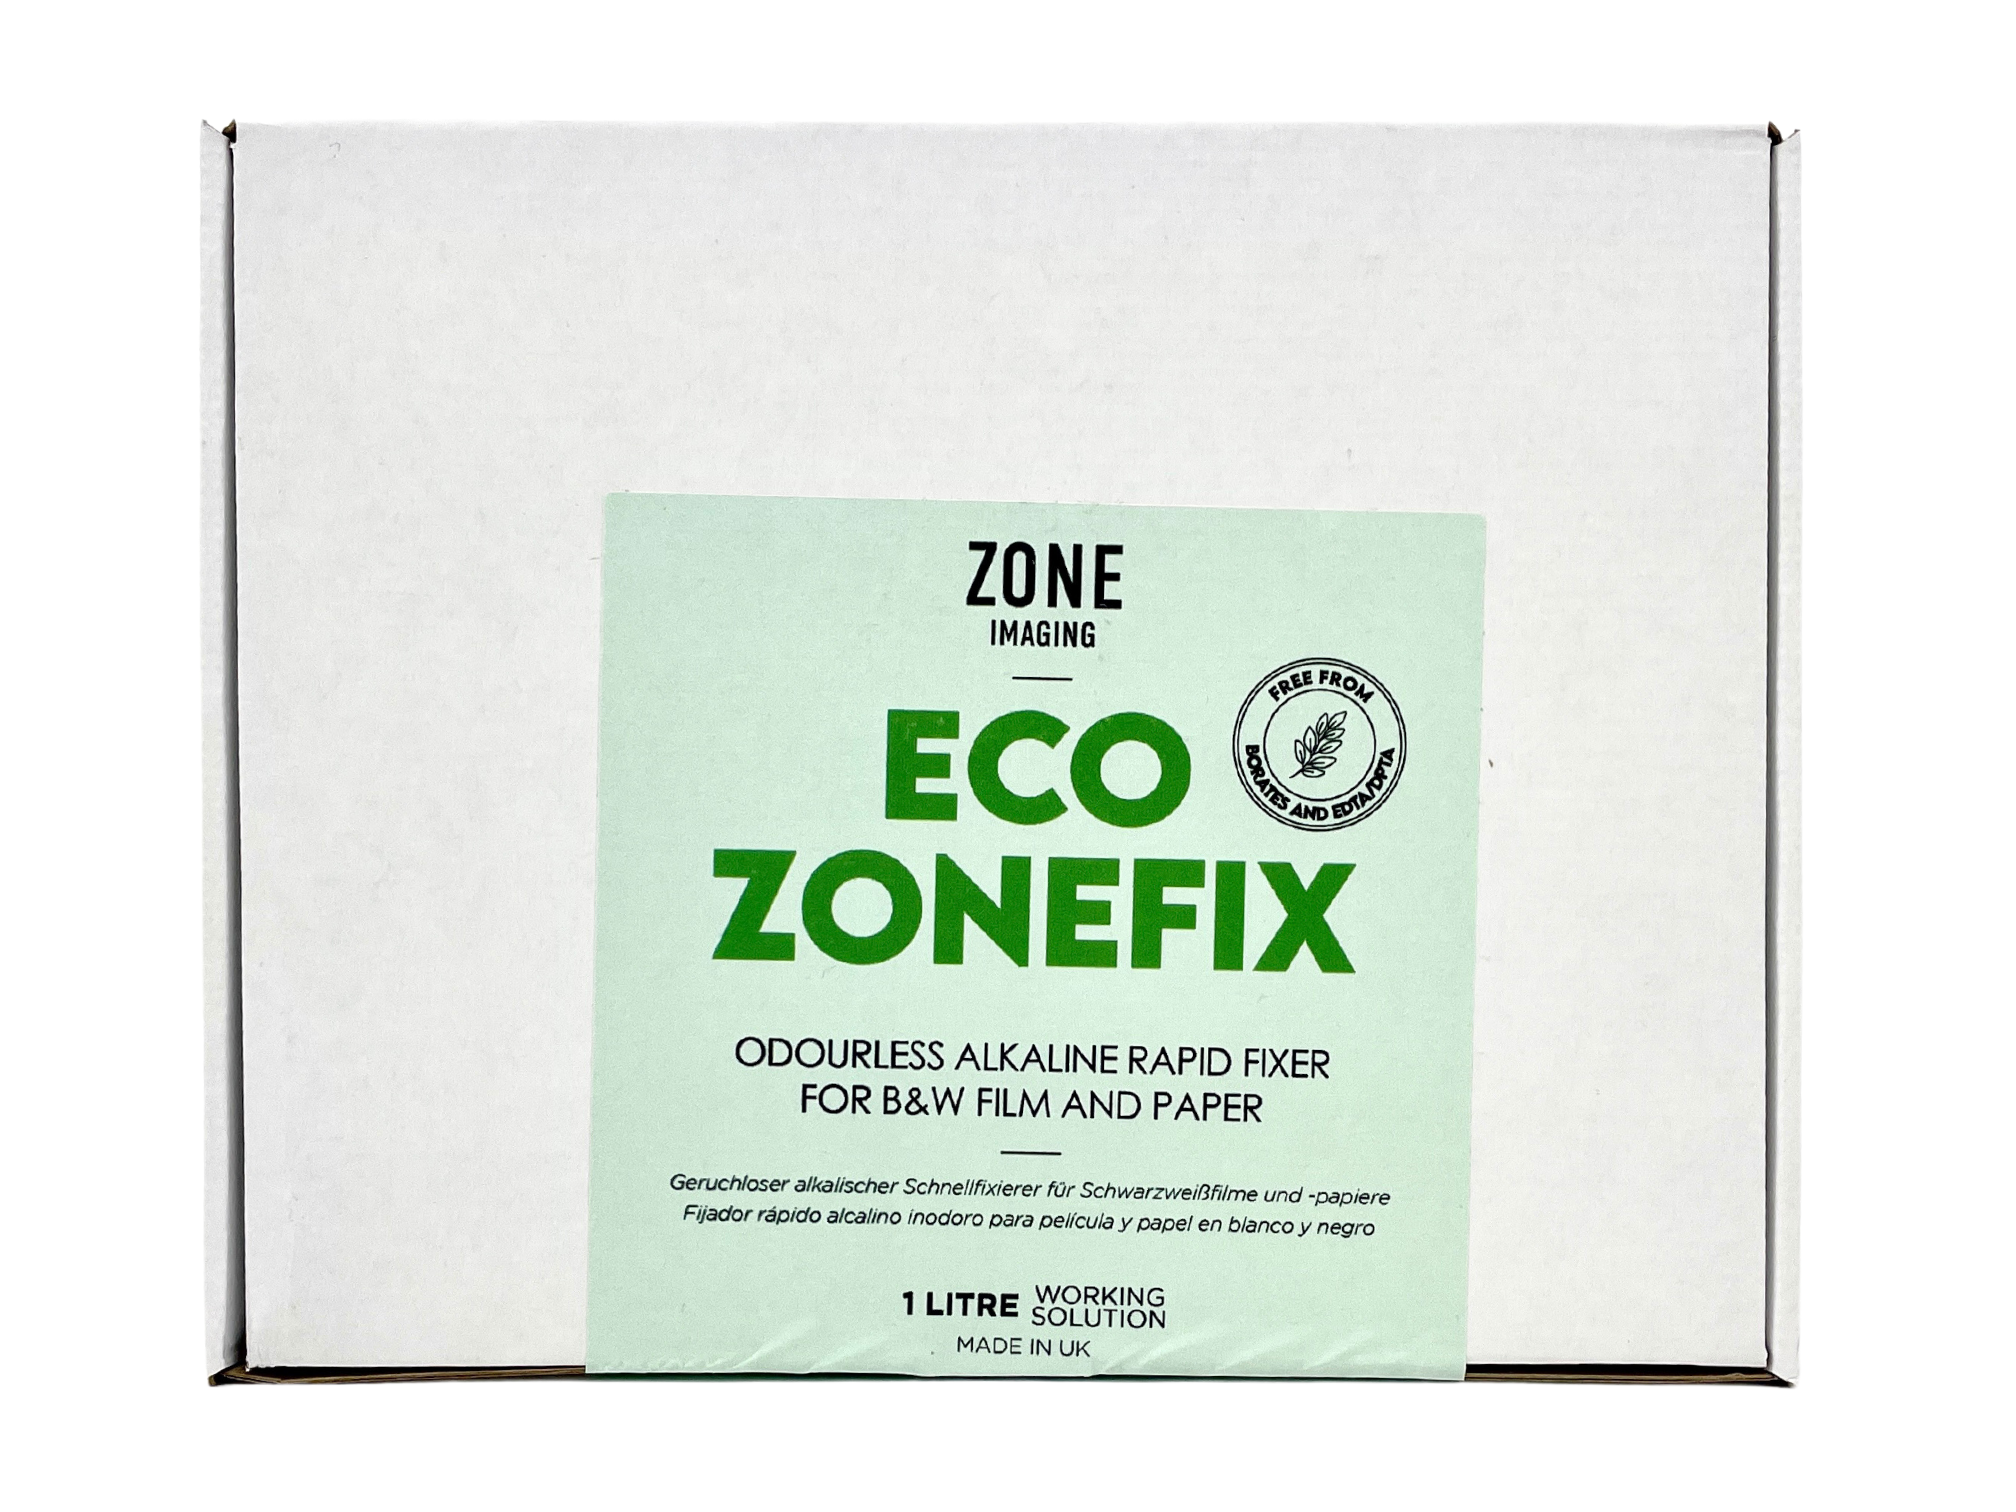 Zone Imaging Eco Zone Fix For B&W Home Developing